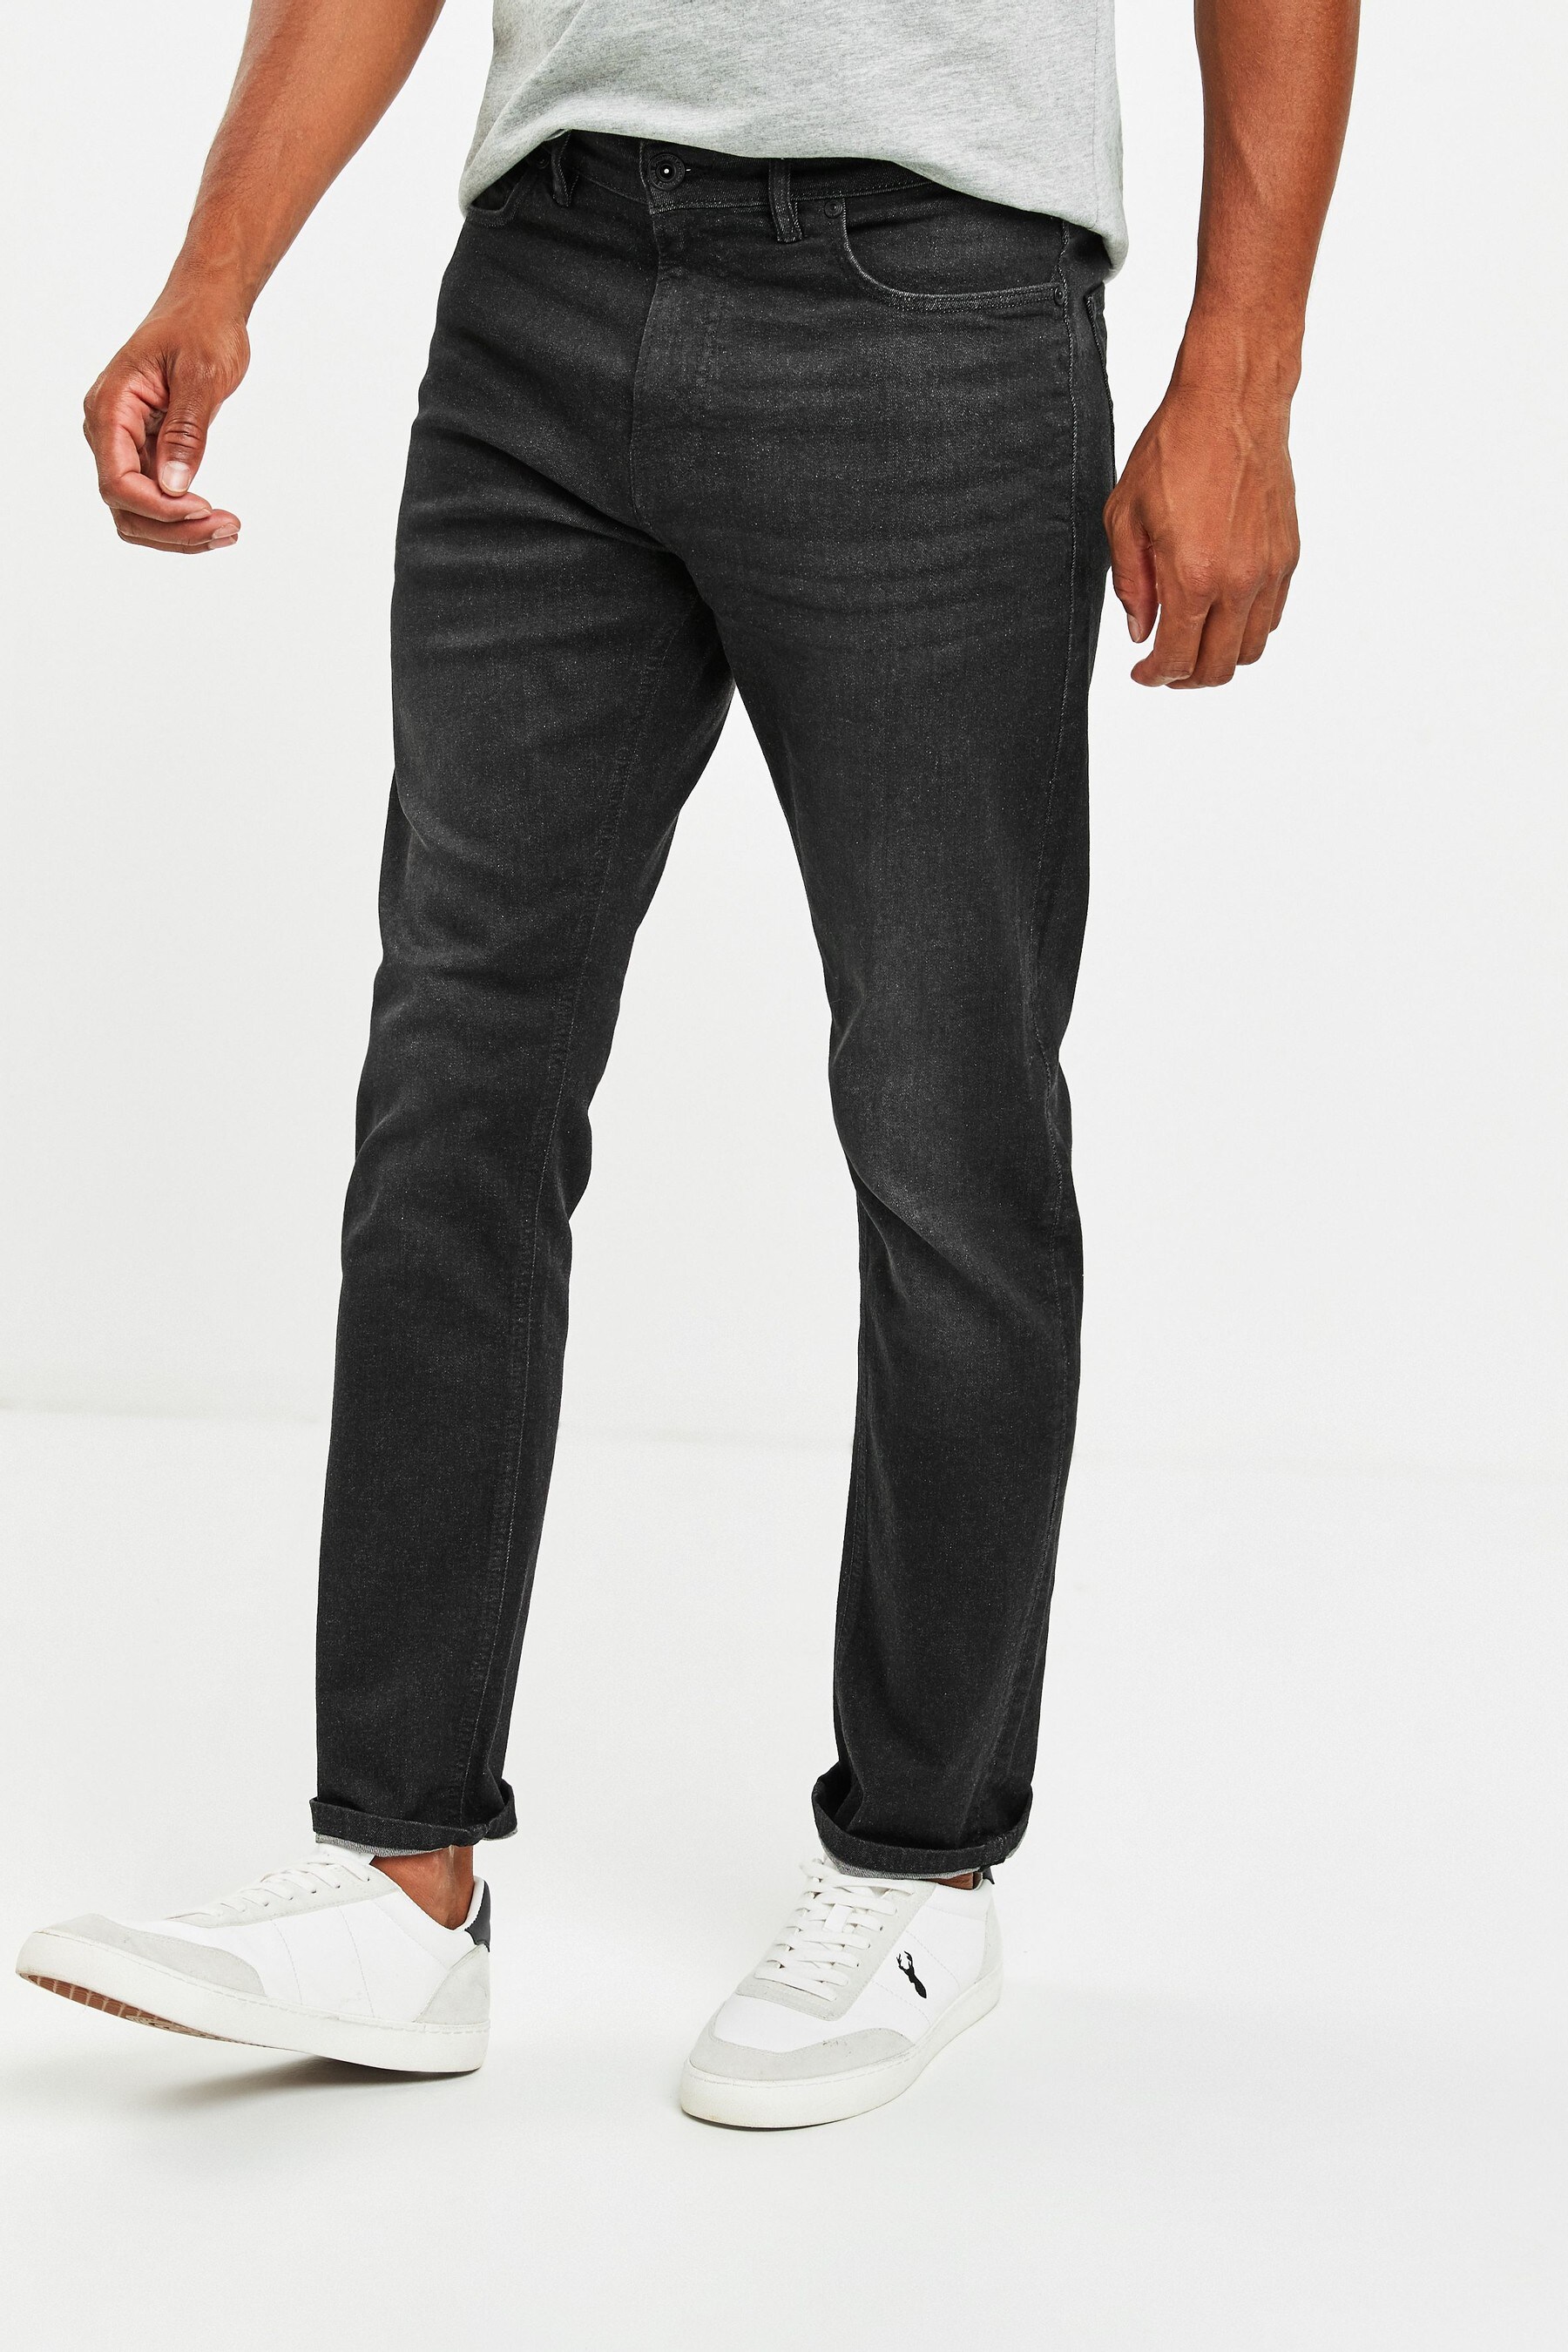 Buy Black Slim Fit Jeans With Stretch from the Next UK online shop